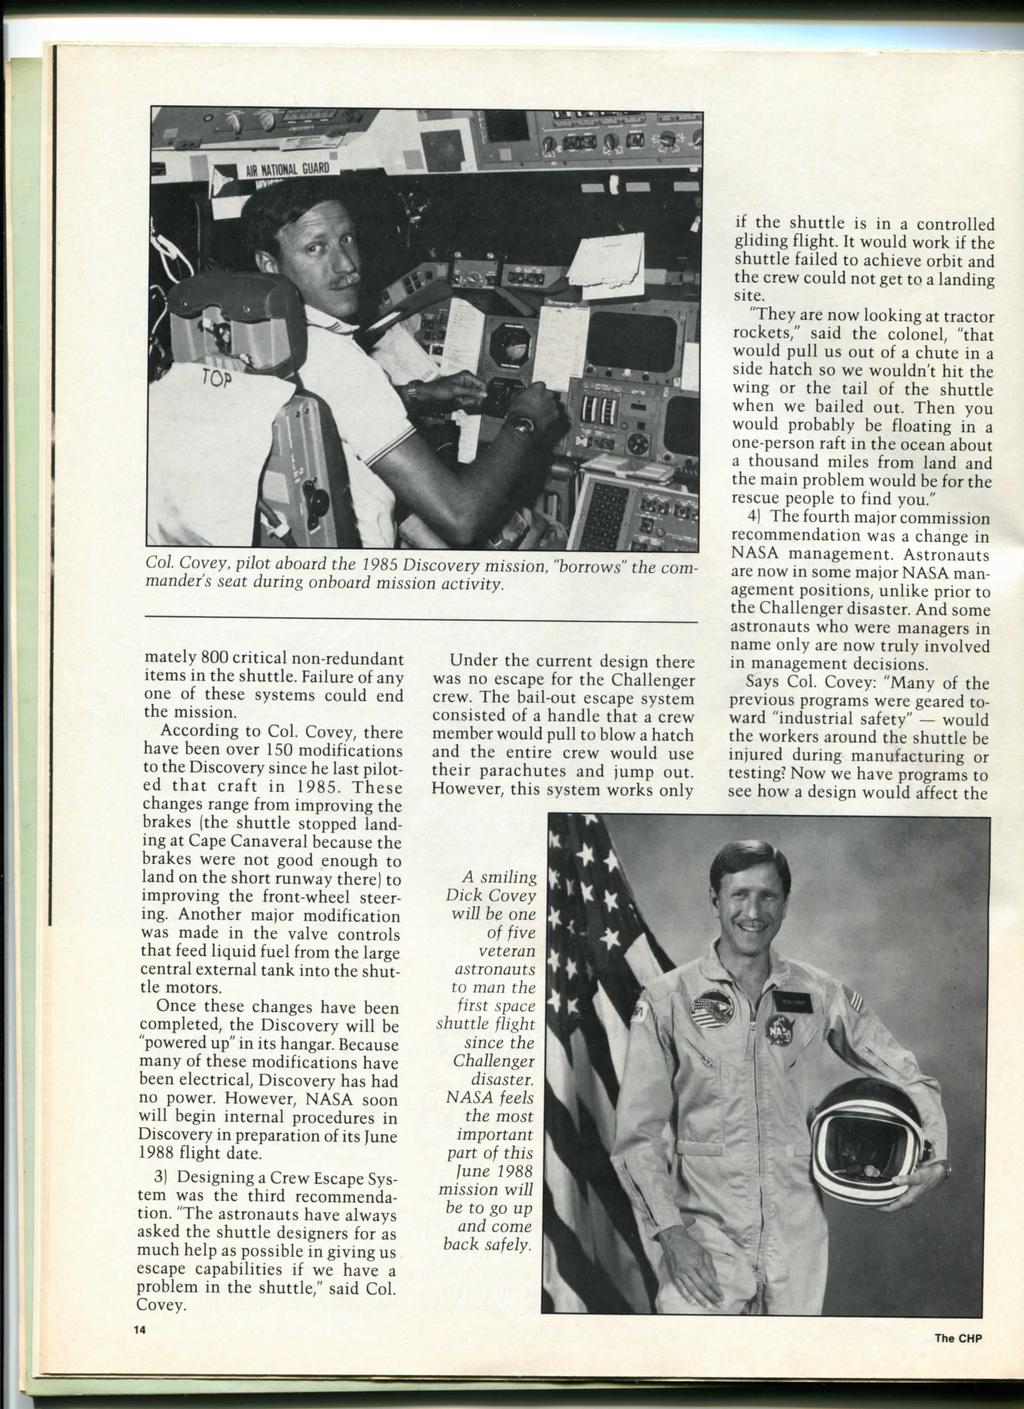 Col Covey, pilot aboard the 1985 Discovery mission, "borrows" the commander's seat during onboard mission activity. mately 800 critical non-redundant items in the shuttle.